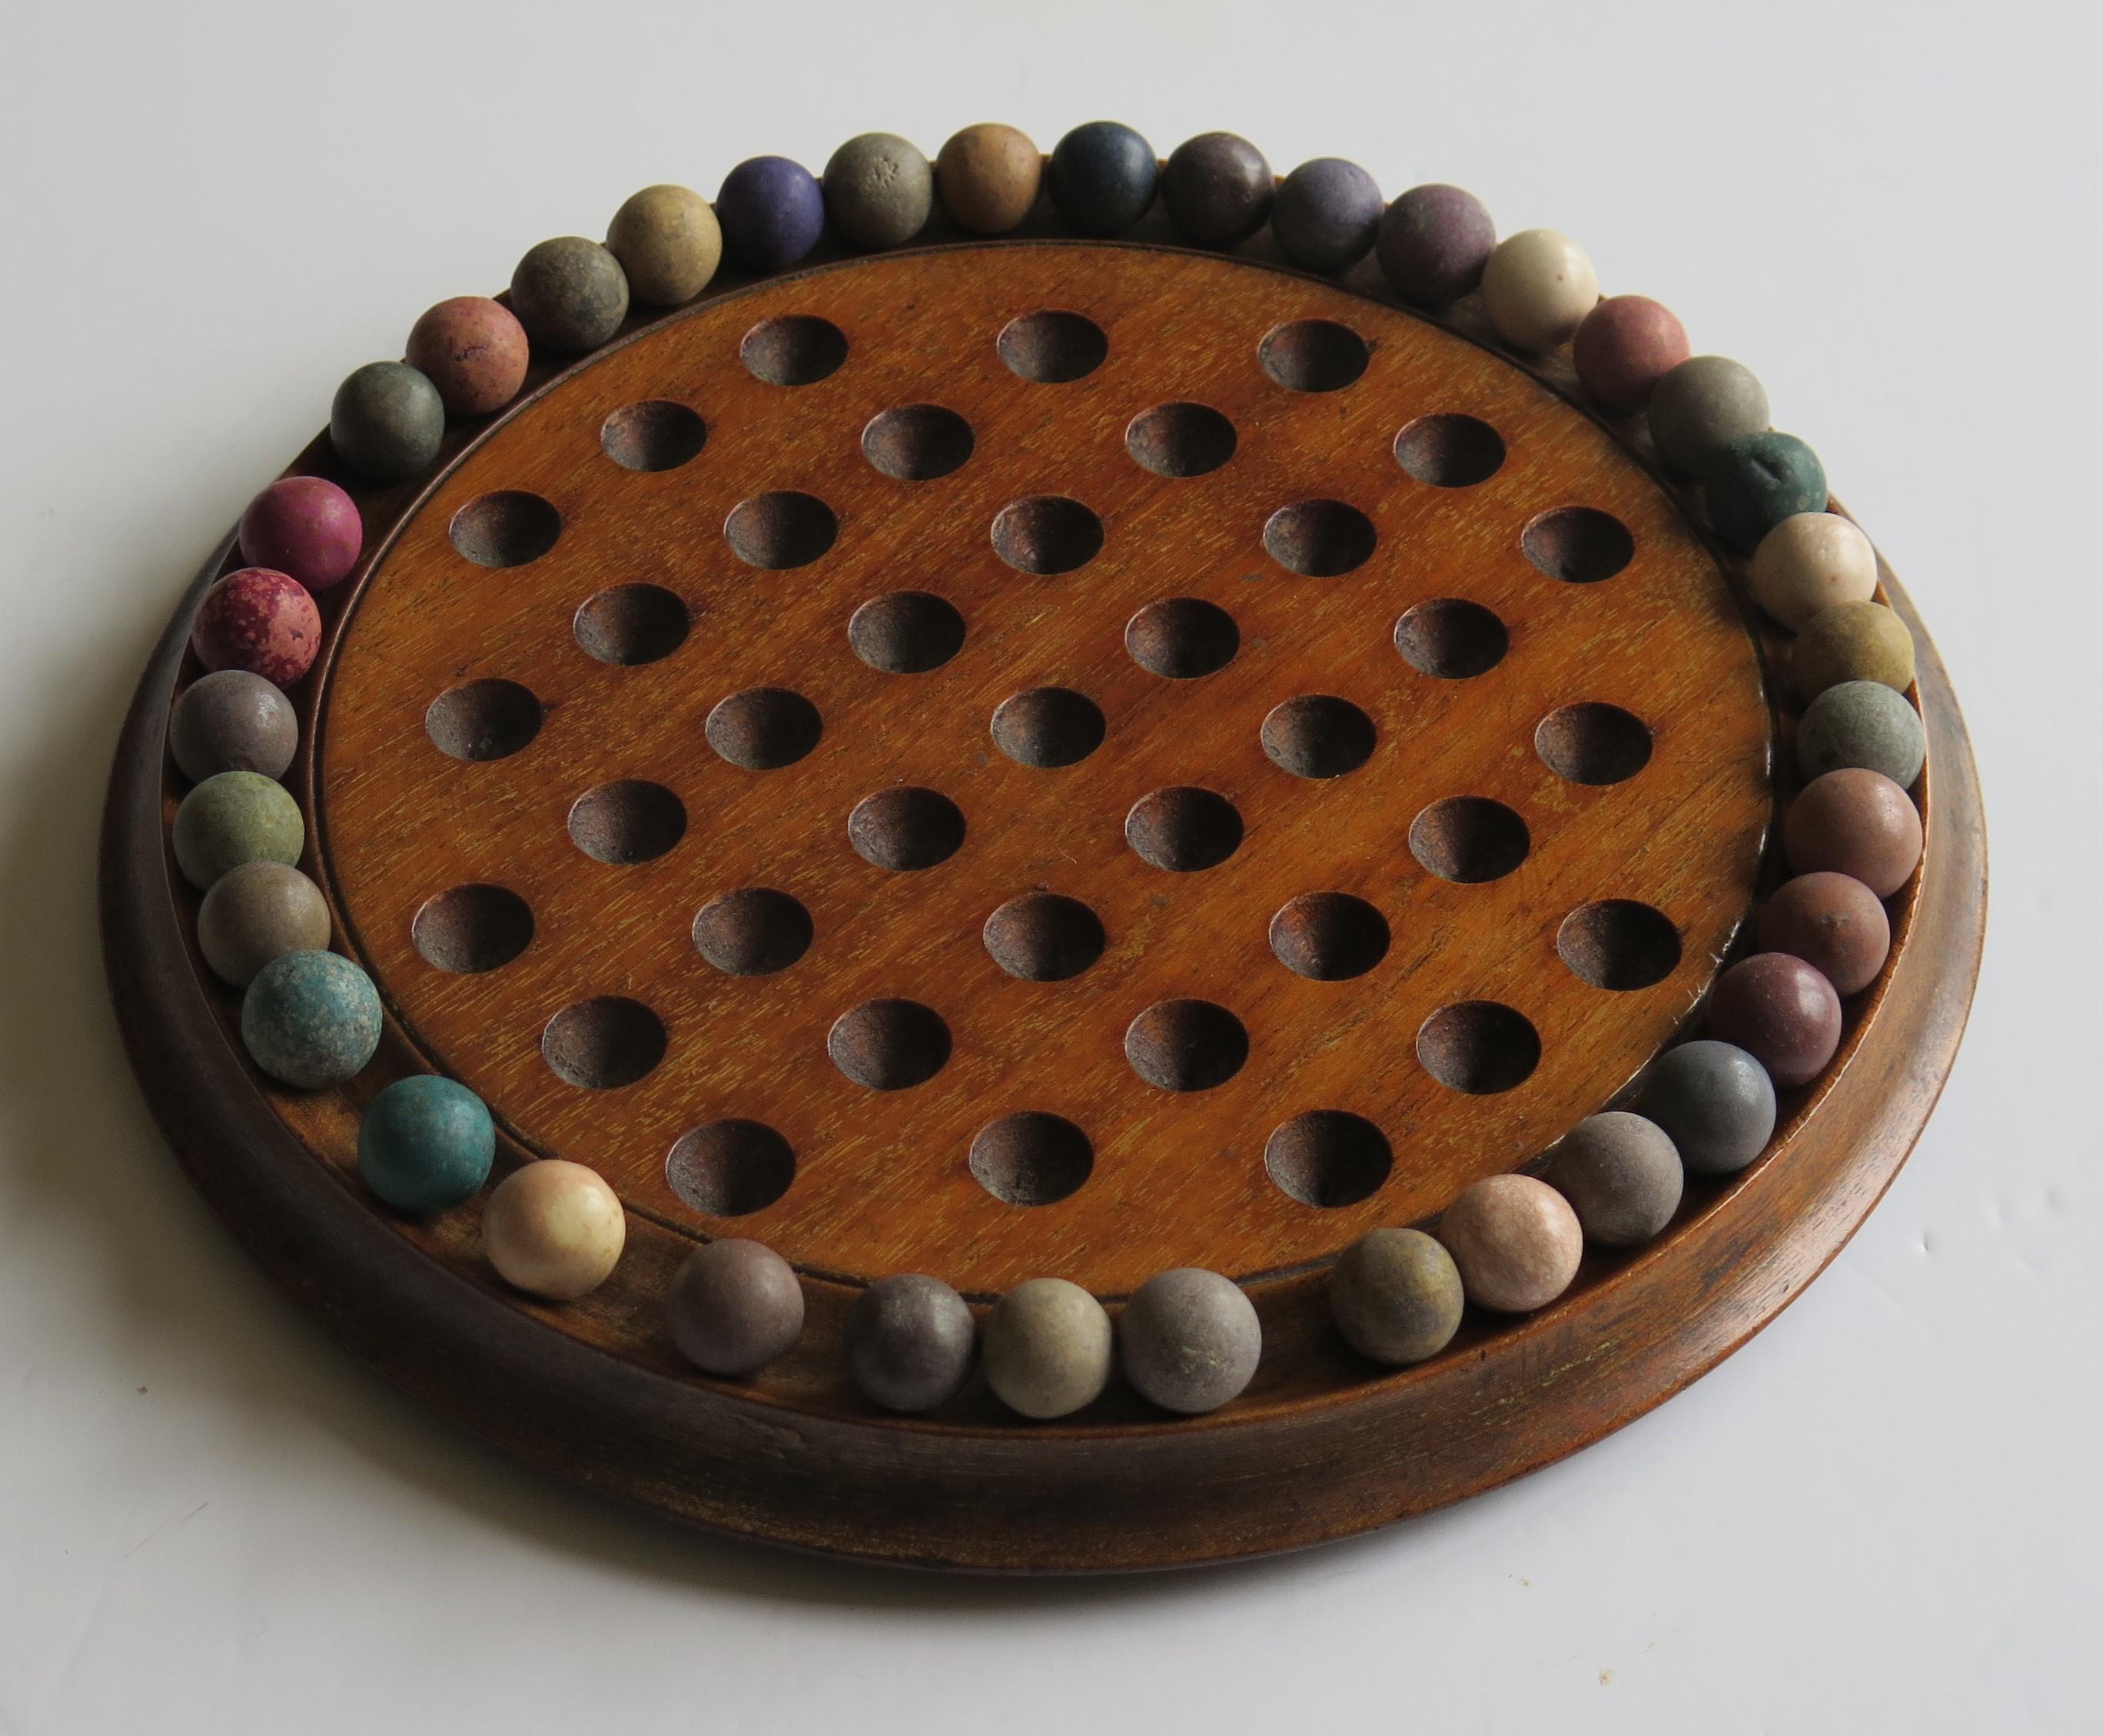 Hand-Crafted Victorian Marble Solitaire Game Hardwood Board 37 Handmade Clay or Stone Marbles